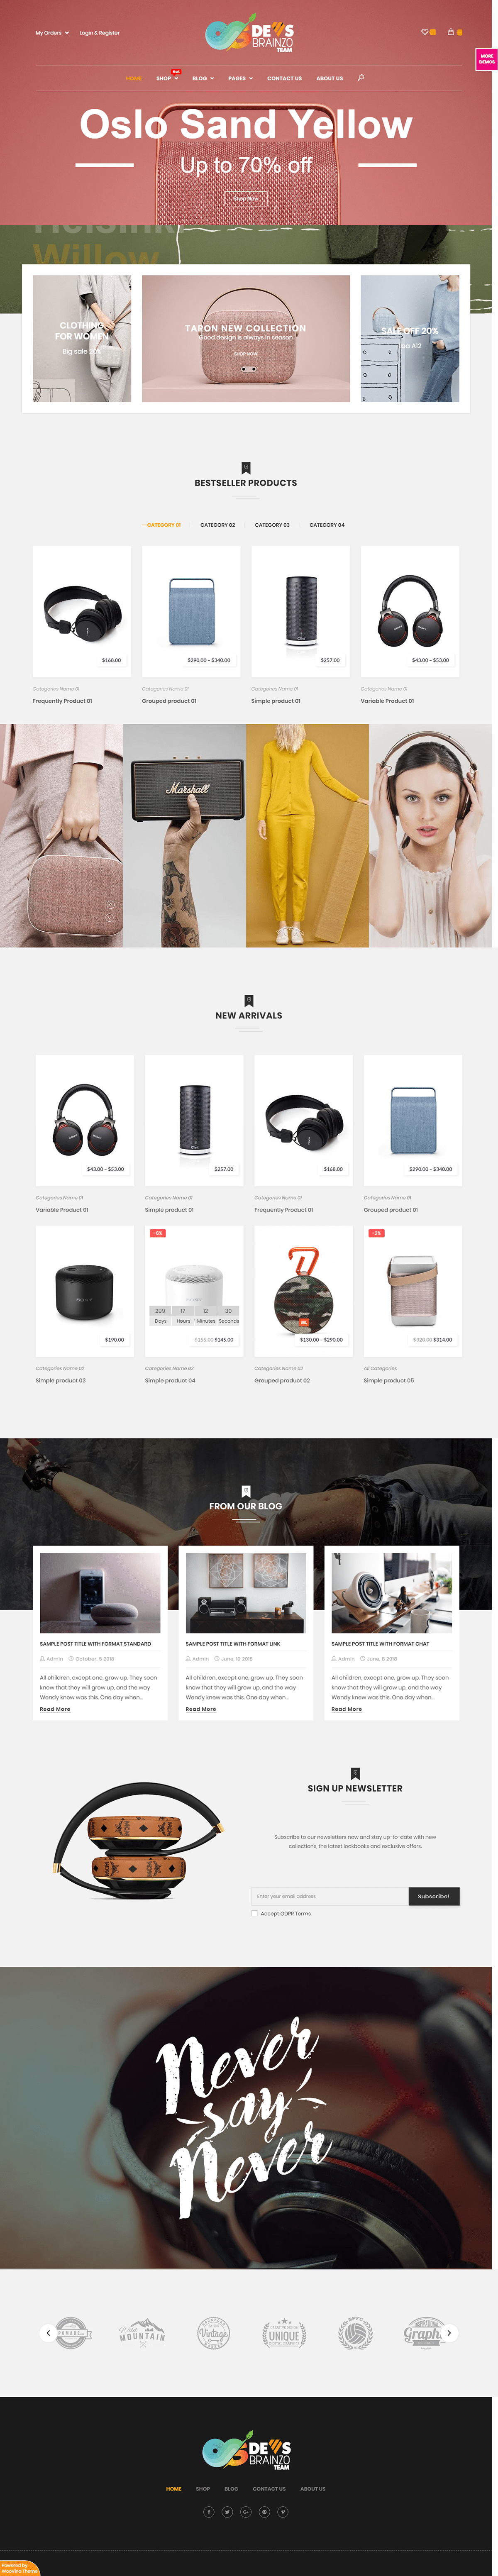 dropshipping Ecommerce ecommerce store ecommerce website Online Business online store shopify store Woocommerce woocommerce customize